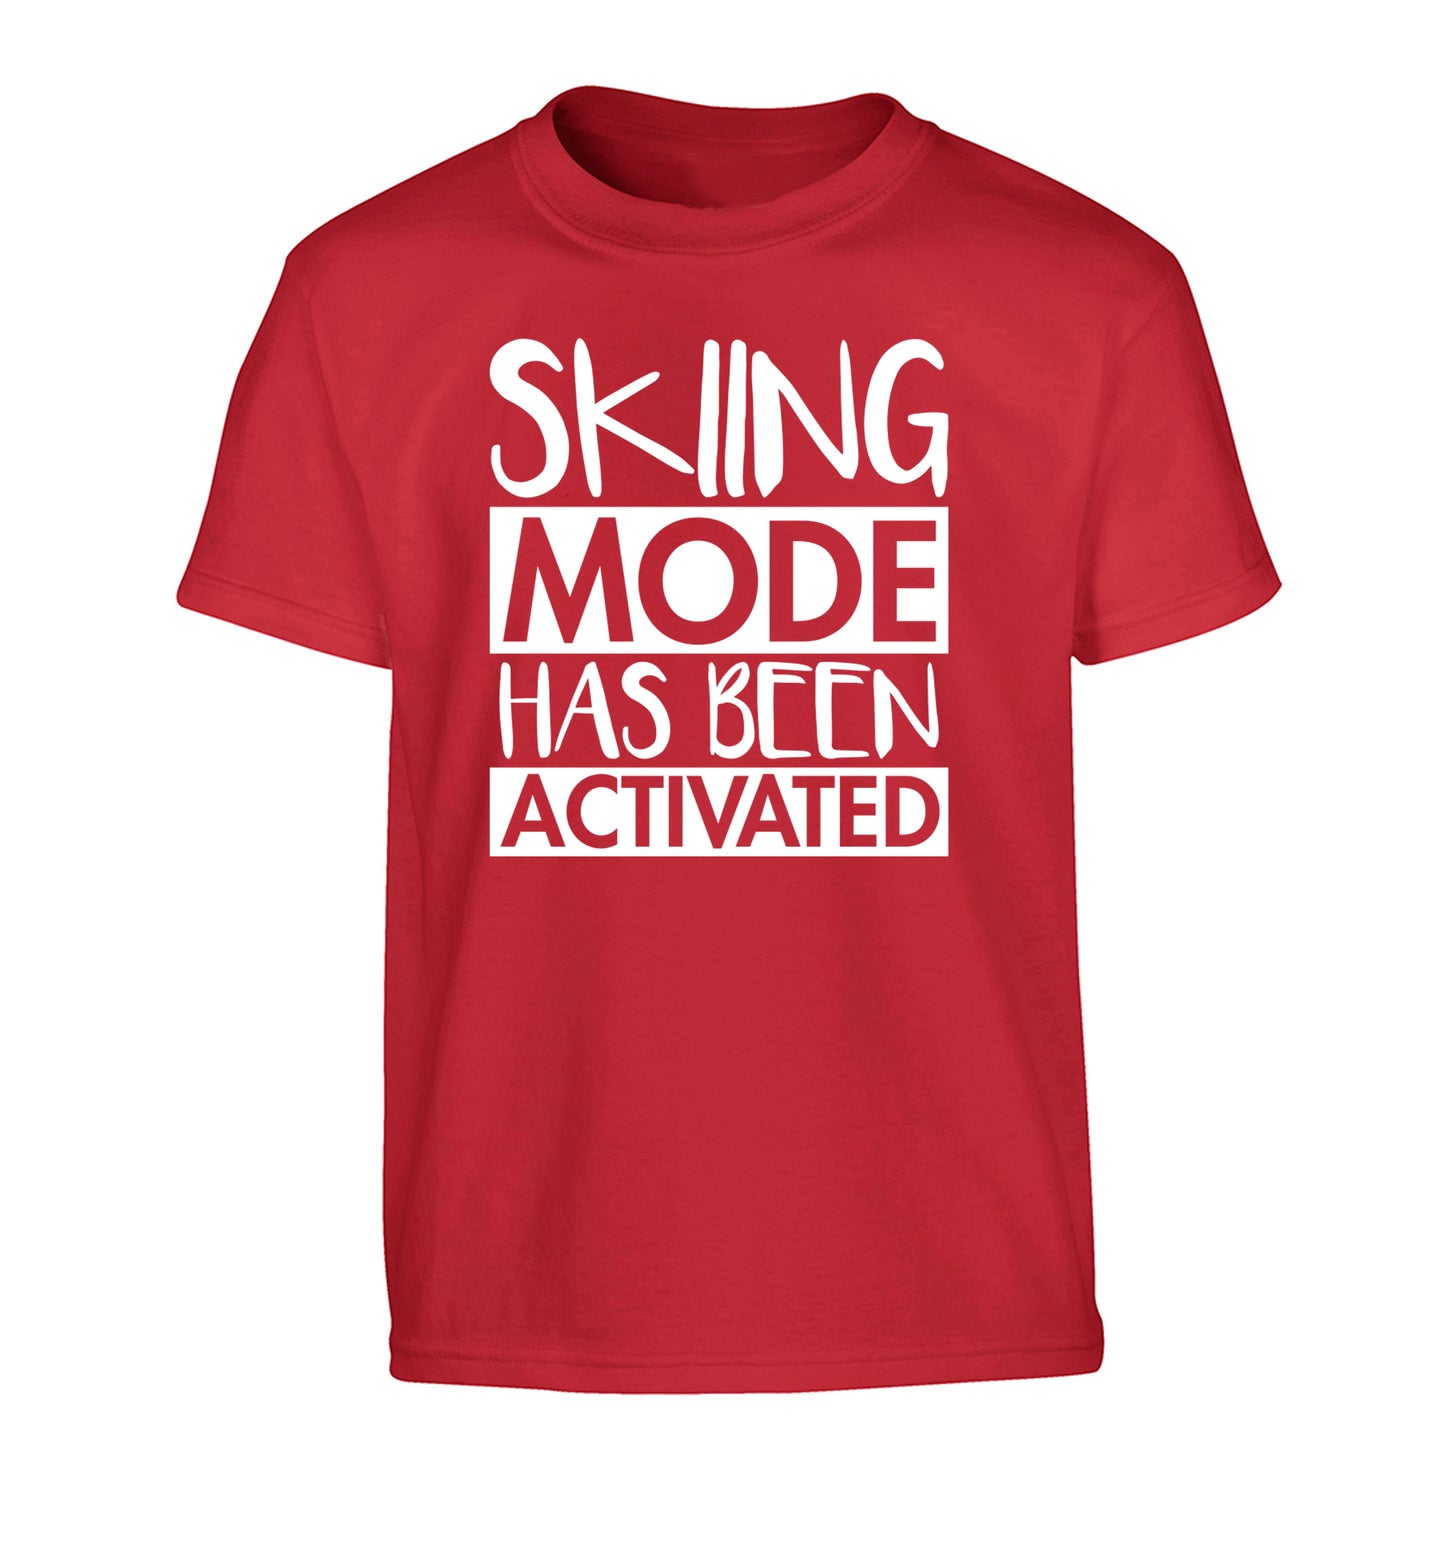 Skiing mode activated Children's red Tshirt 12-14 Years